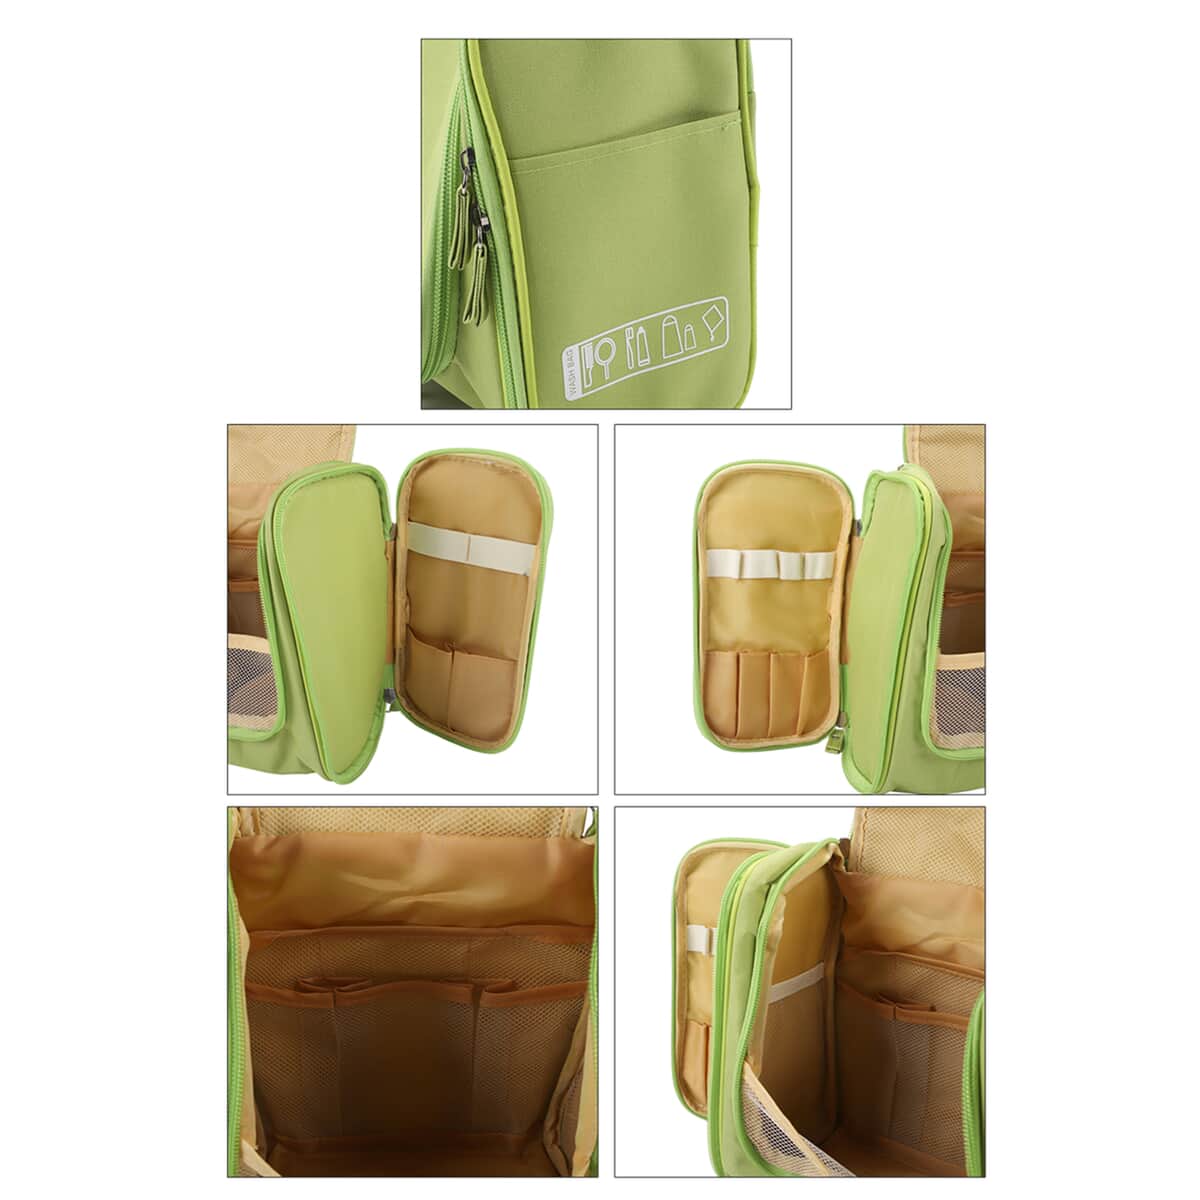 HOMESMART Green Travel Toiletry Bag (9.45"x9.84"x3.94") image number 3